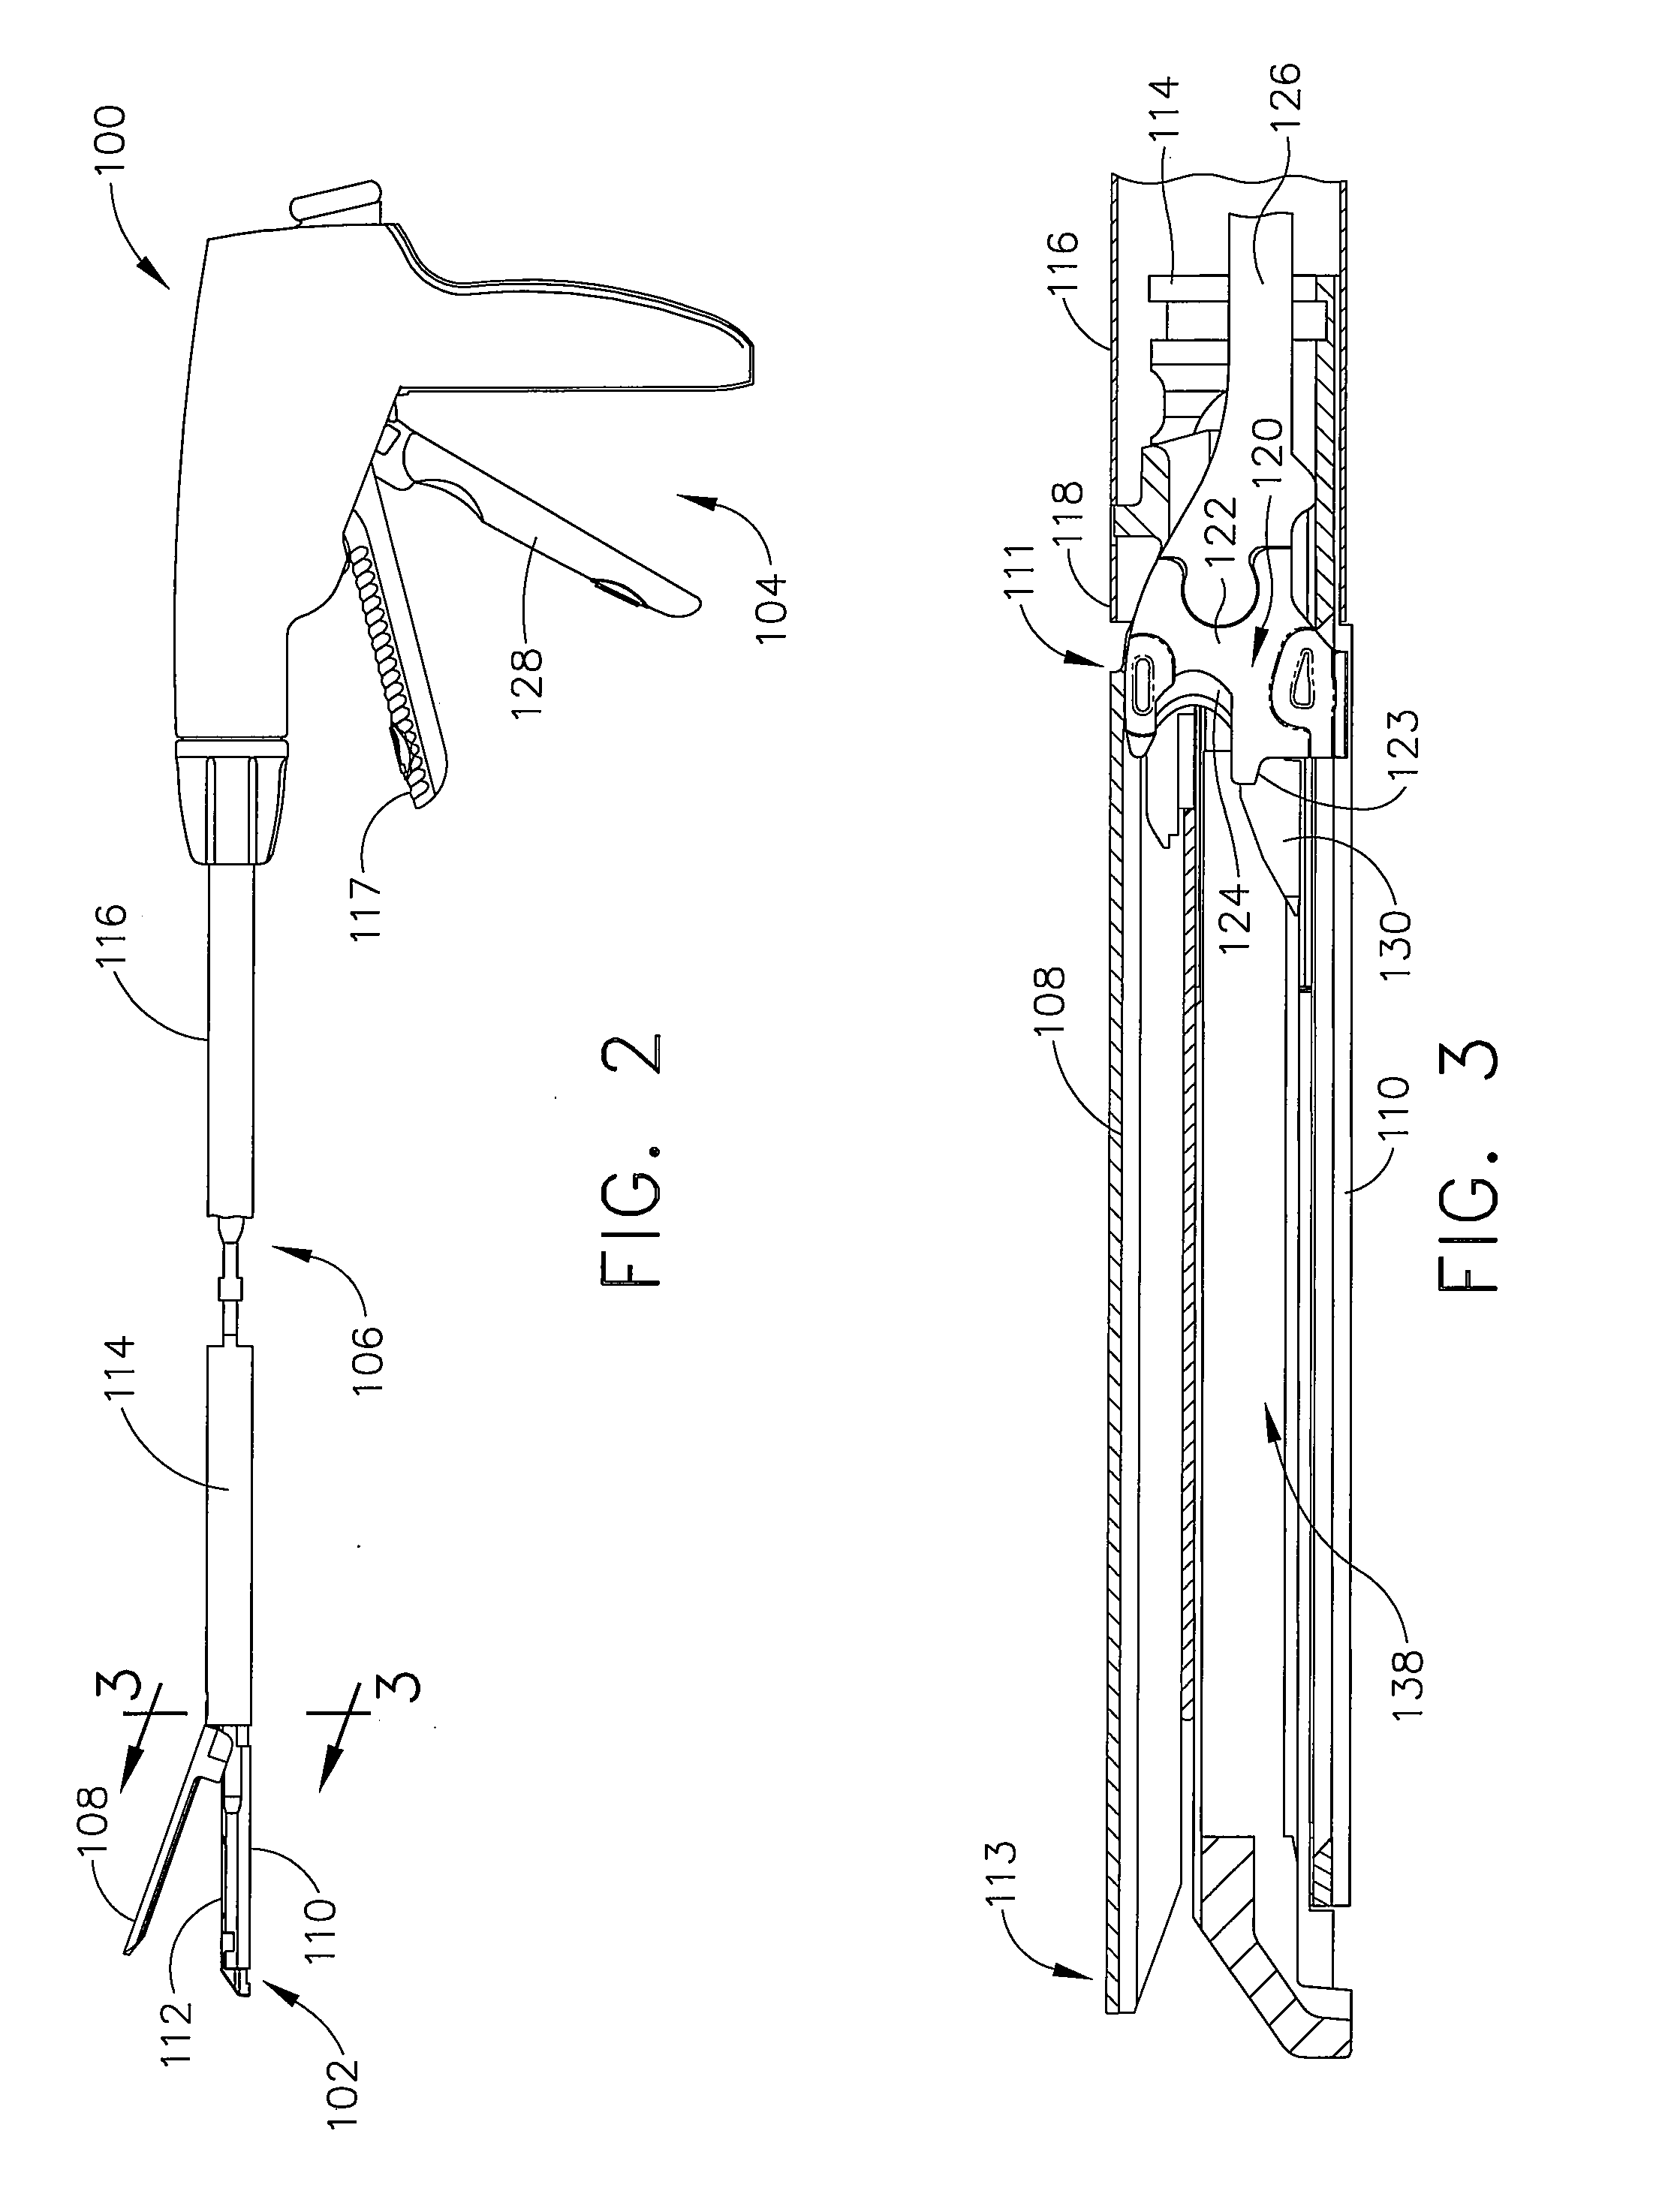 Surgical stapling device having supports for a flexible drive mechanism